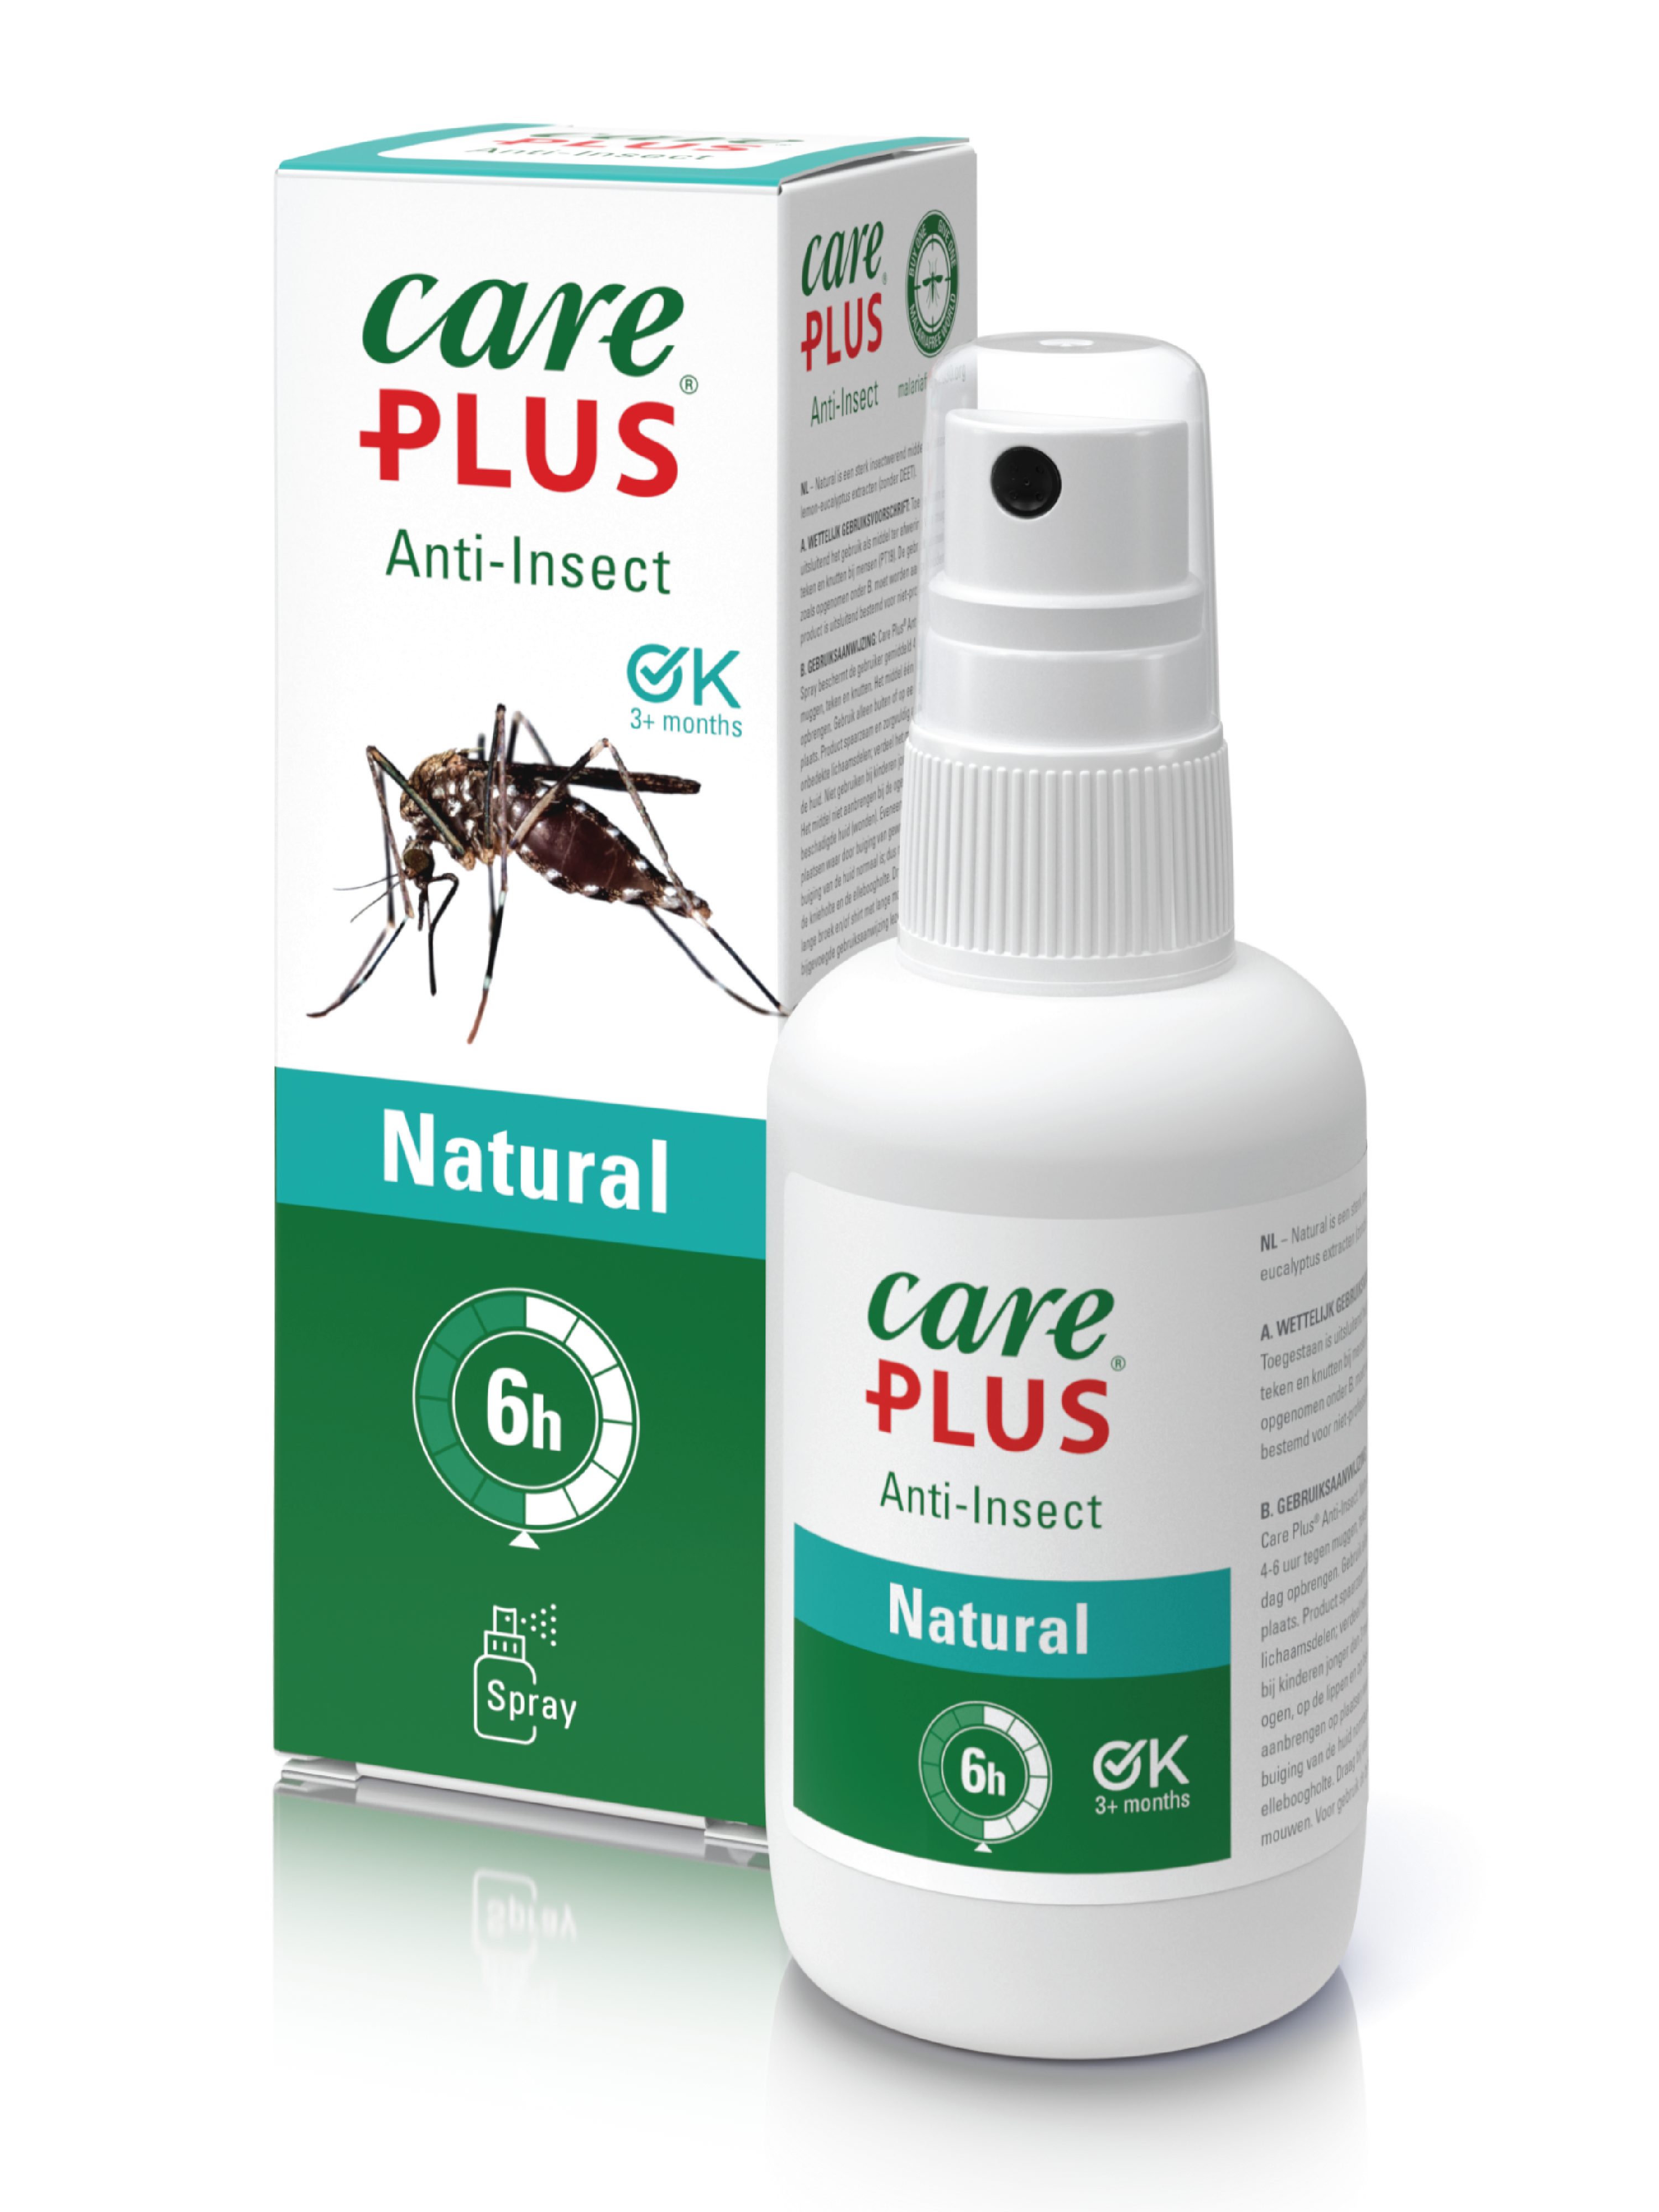 Anti-Insect Natural, spray, 60 ml